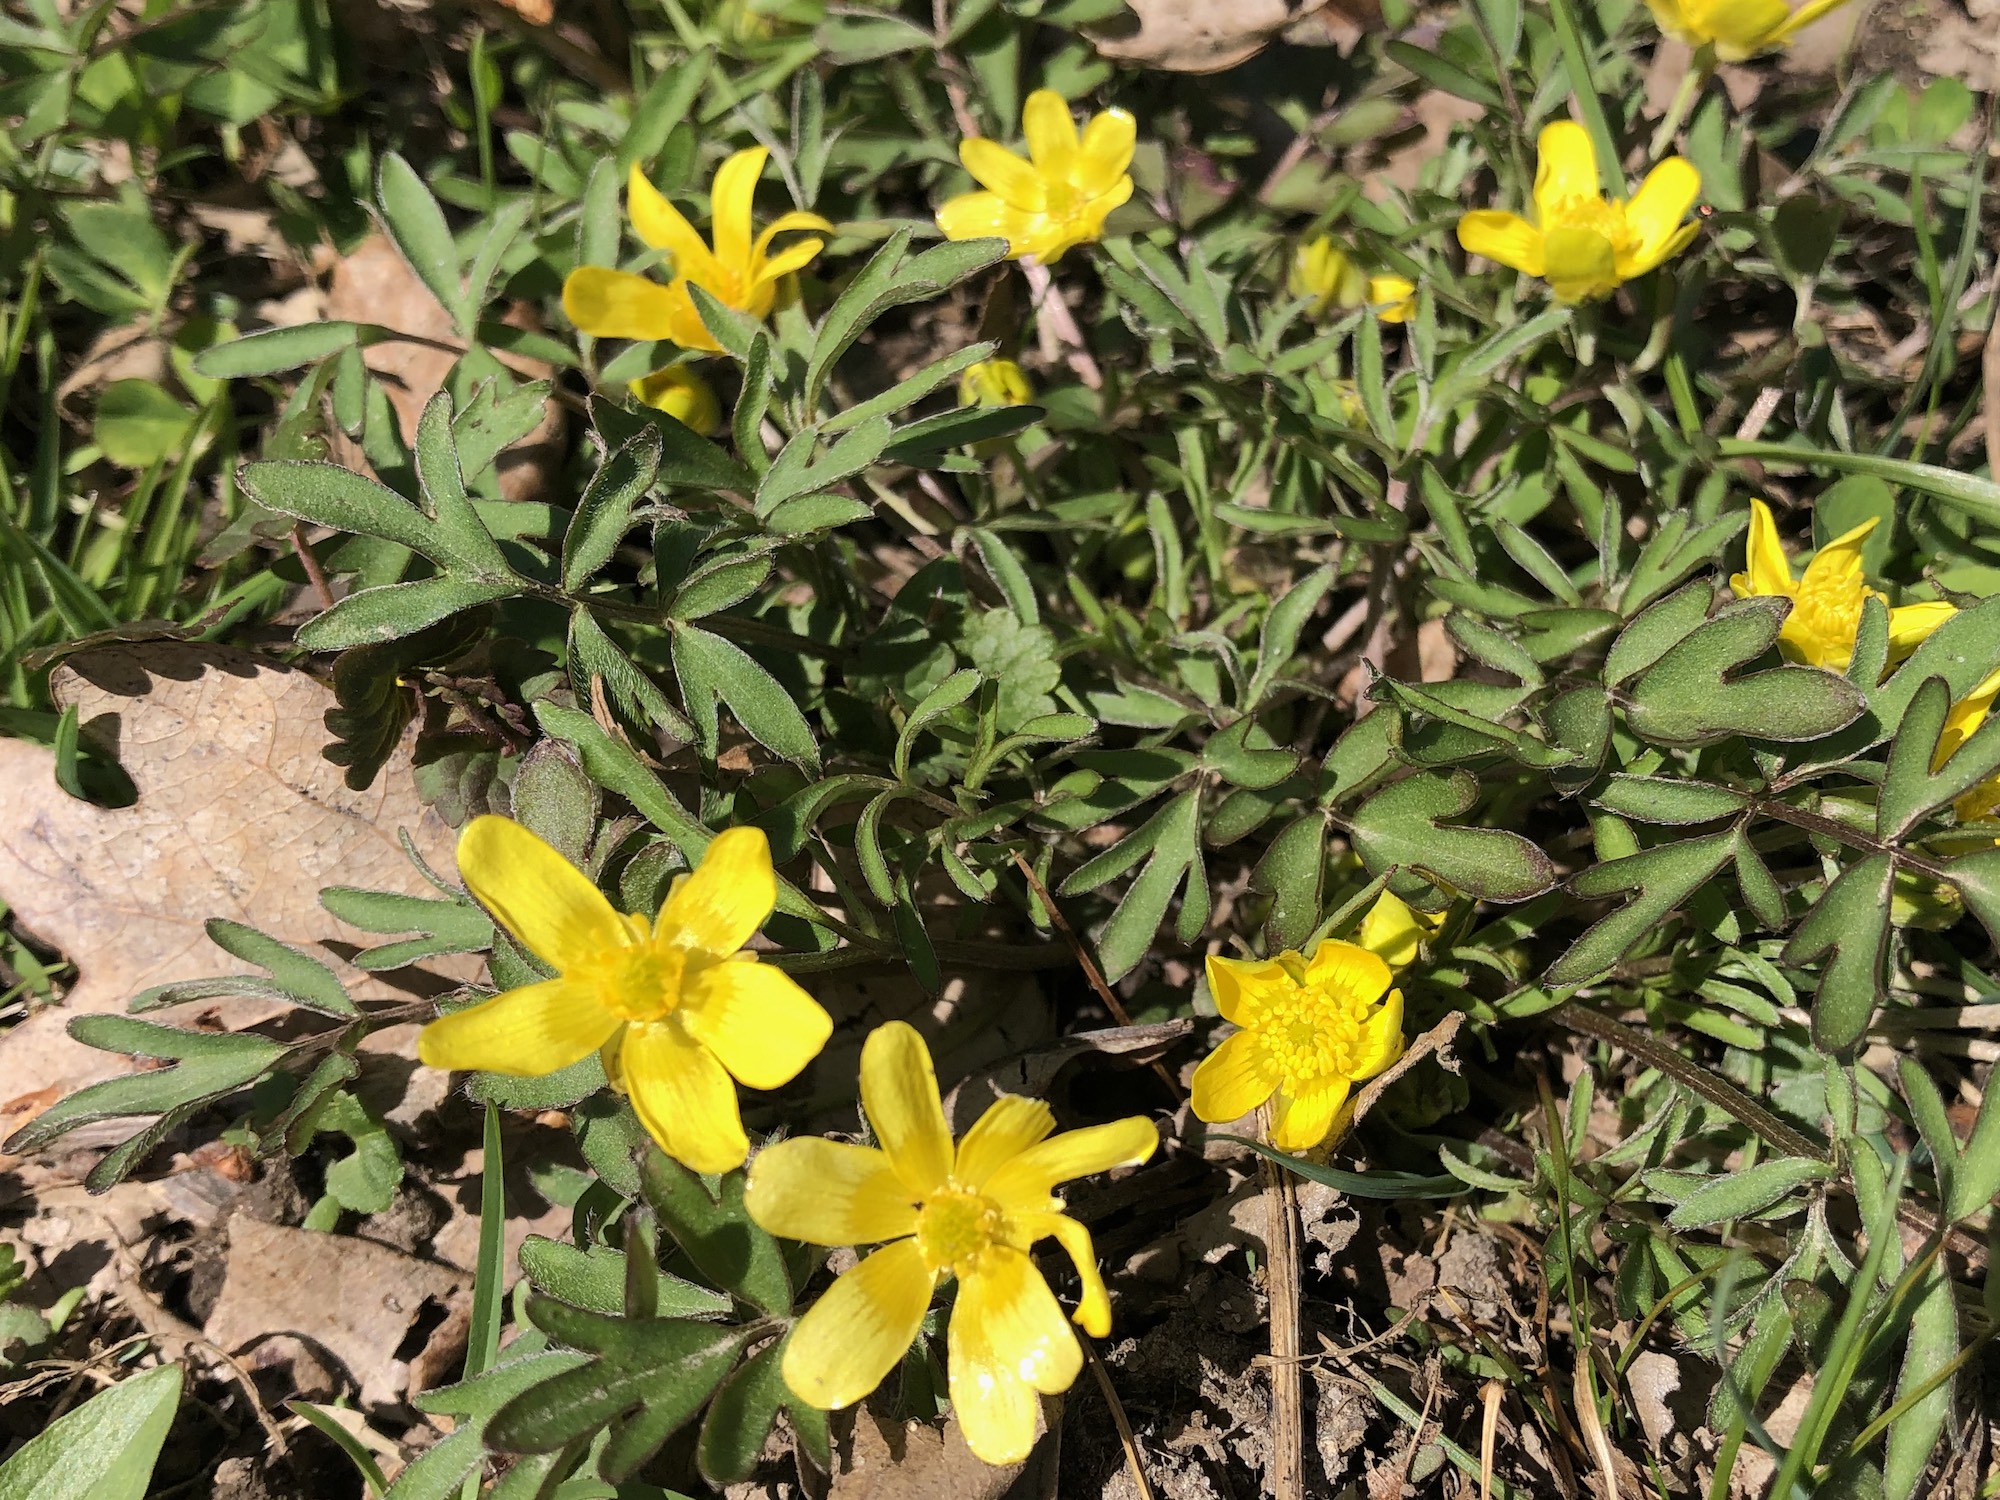 Early Buttercup in Nakoma Park in Madison, Wisconsin on April 26, 2020.